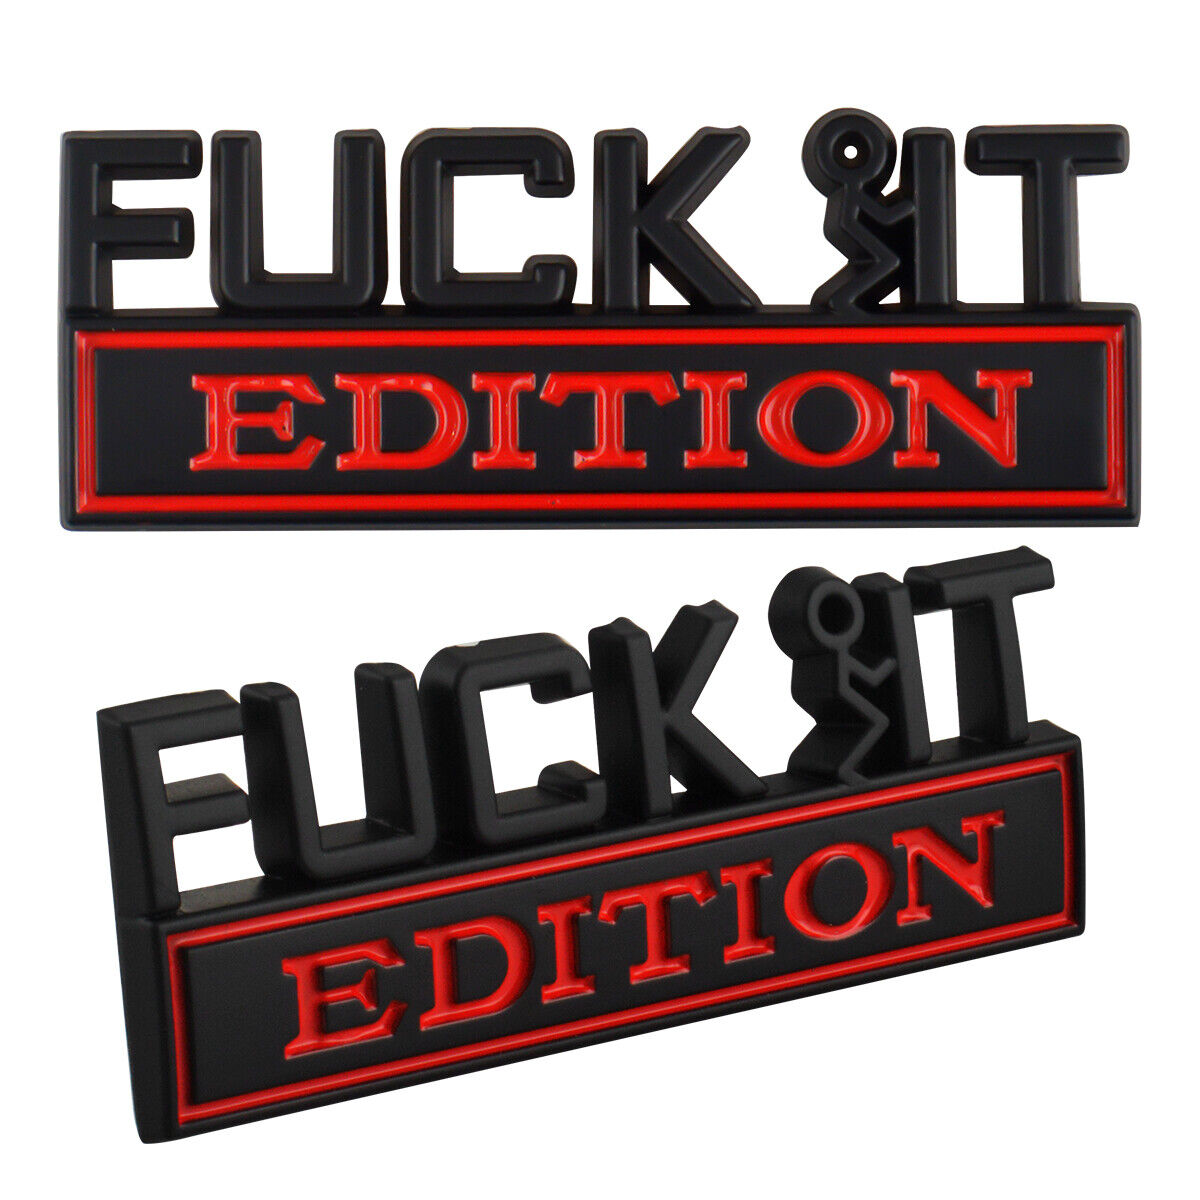 2PC F*CK IT GUY EDITION Chrome emblem Badges fits Chevy Toyota Ford Car Truck